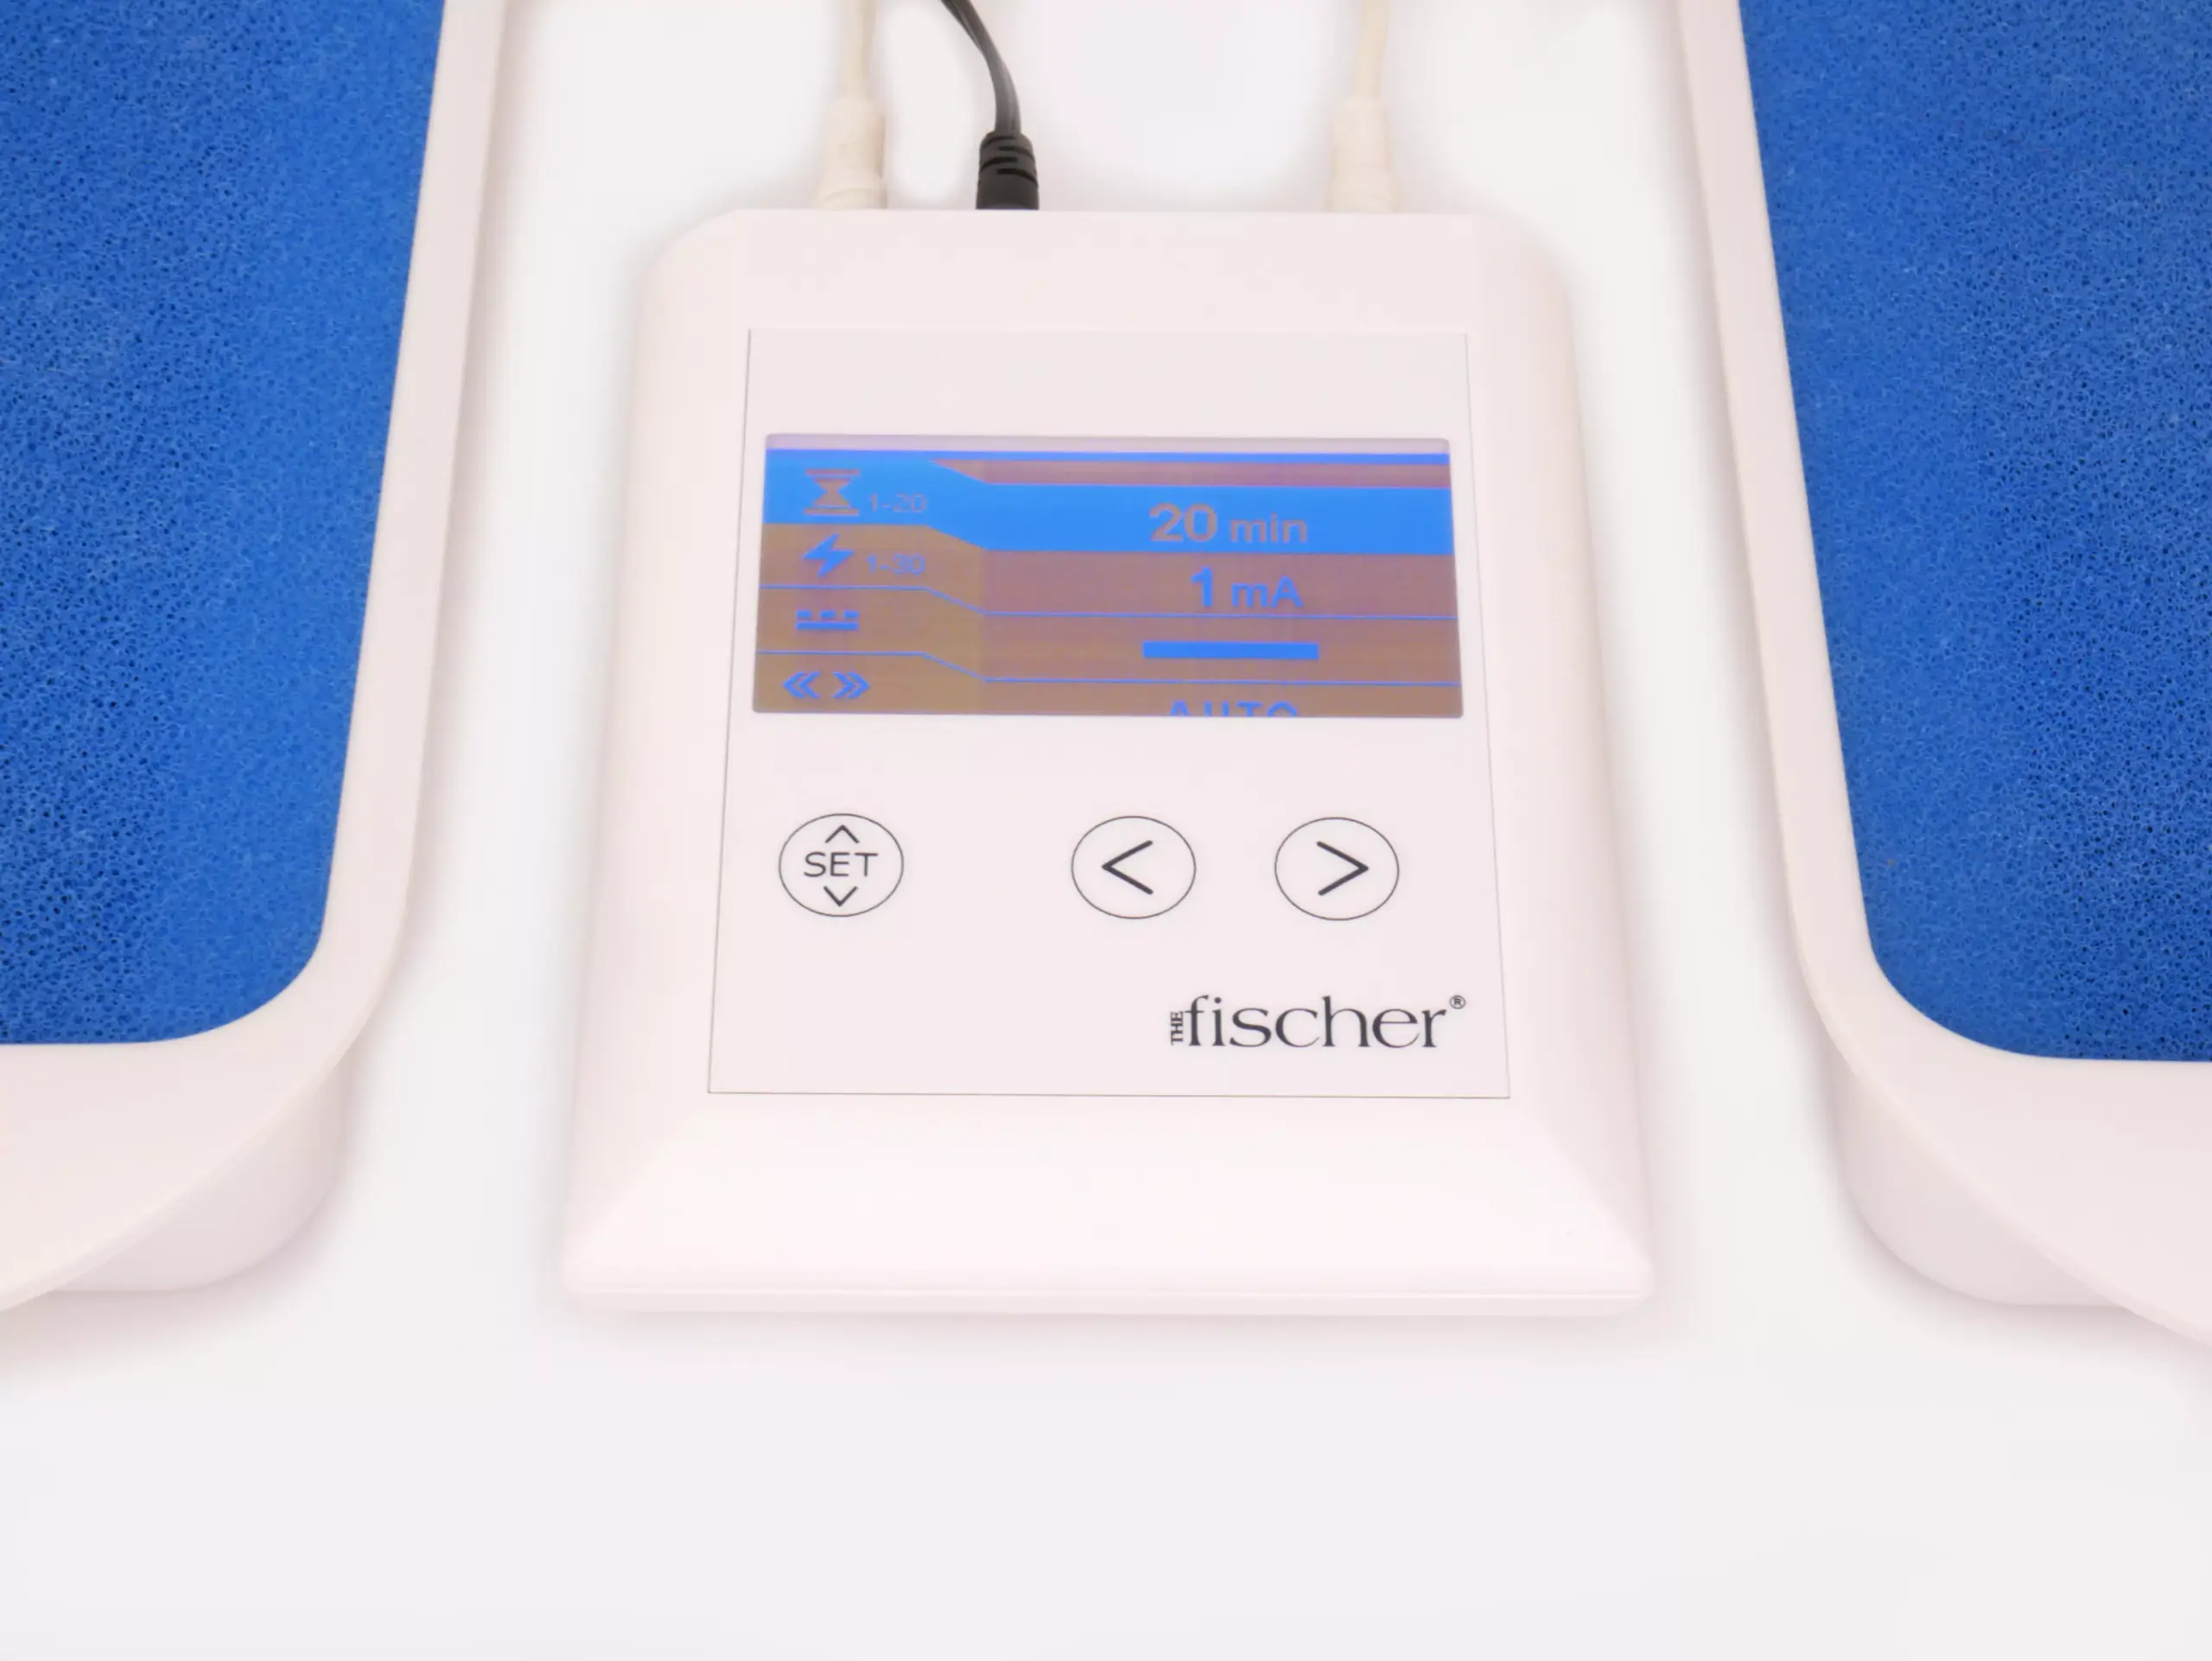 Photograph showcasing the white, rectangular 'main control unit' of RA Fischer's 'The Fischer' Device—an iontophoresis device designed for the treatment of hyperhidrosis (excessive sweating). The Fischer iontophoresis device is characterized by its white and rectangular shape with a blue and grey screen. On the left side of the device, there is a button labeled 'SET,' while two buttons on the right are represented by arrows. The Fischer device logo is placed in the bottom right corner. It is in between the water bath trays that have the blue ph-balancing foam and metal-free electrodes inside. [ Iontophoresis Device for Sweating ]